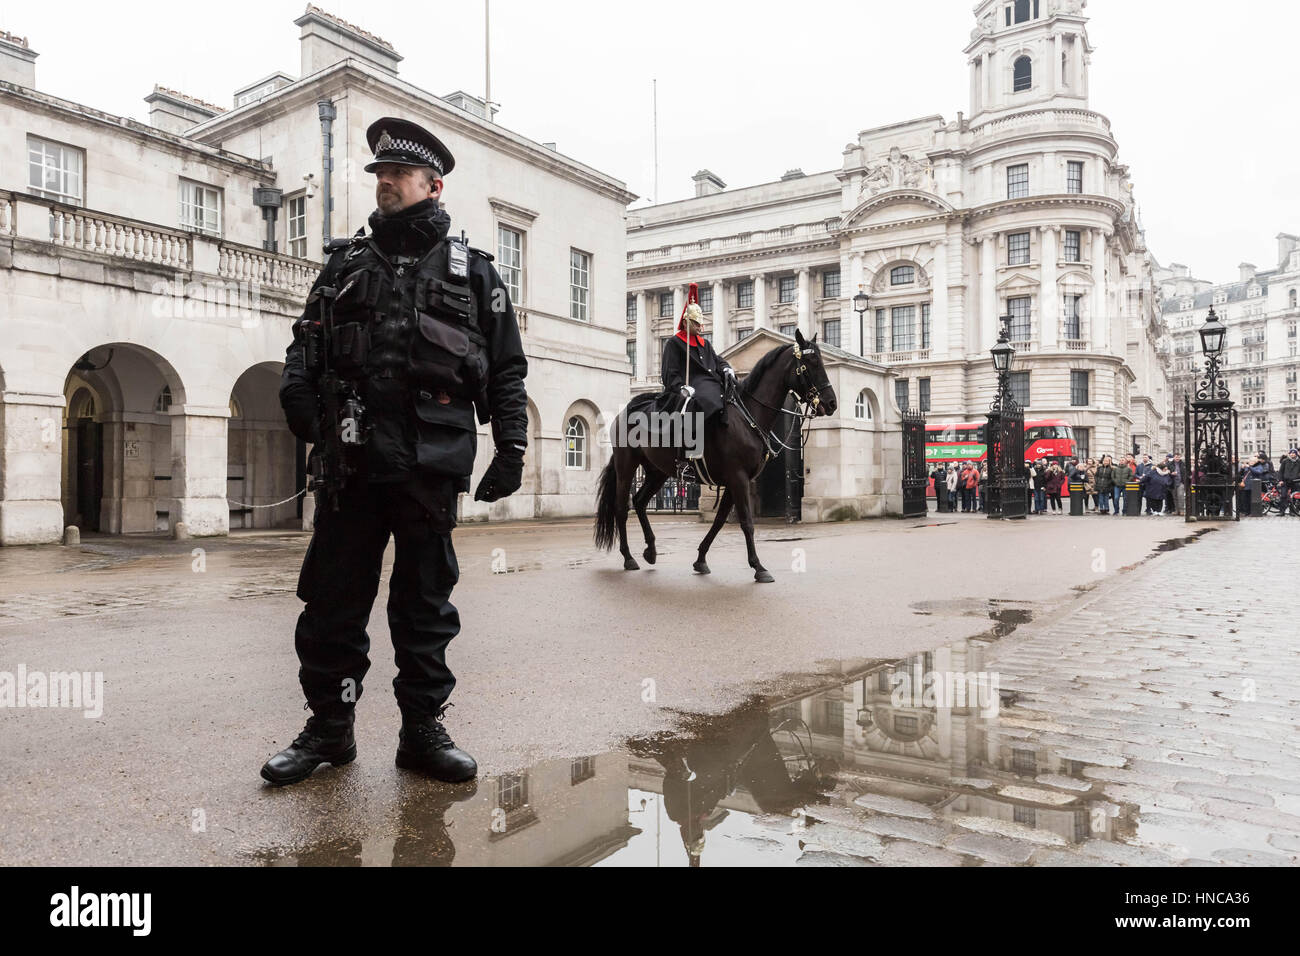 London, UK. 11th Feb, 2017. Heightened armed police security during Changing of the Horse Guards at Whitehall Credit: Guy Corbishley/Alamy Live News Stock Photo